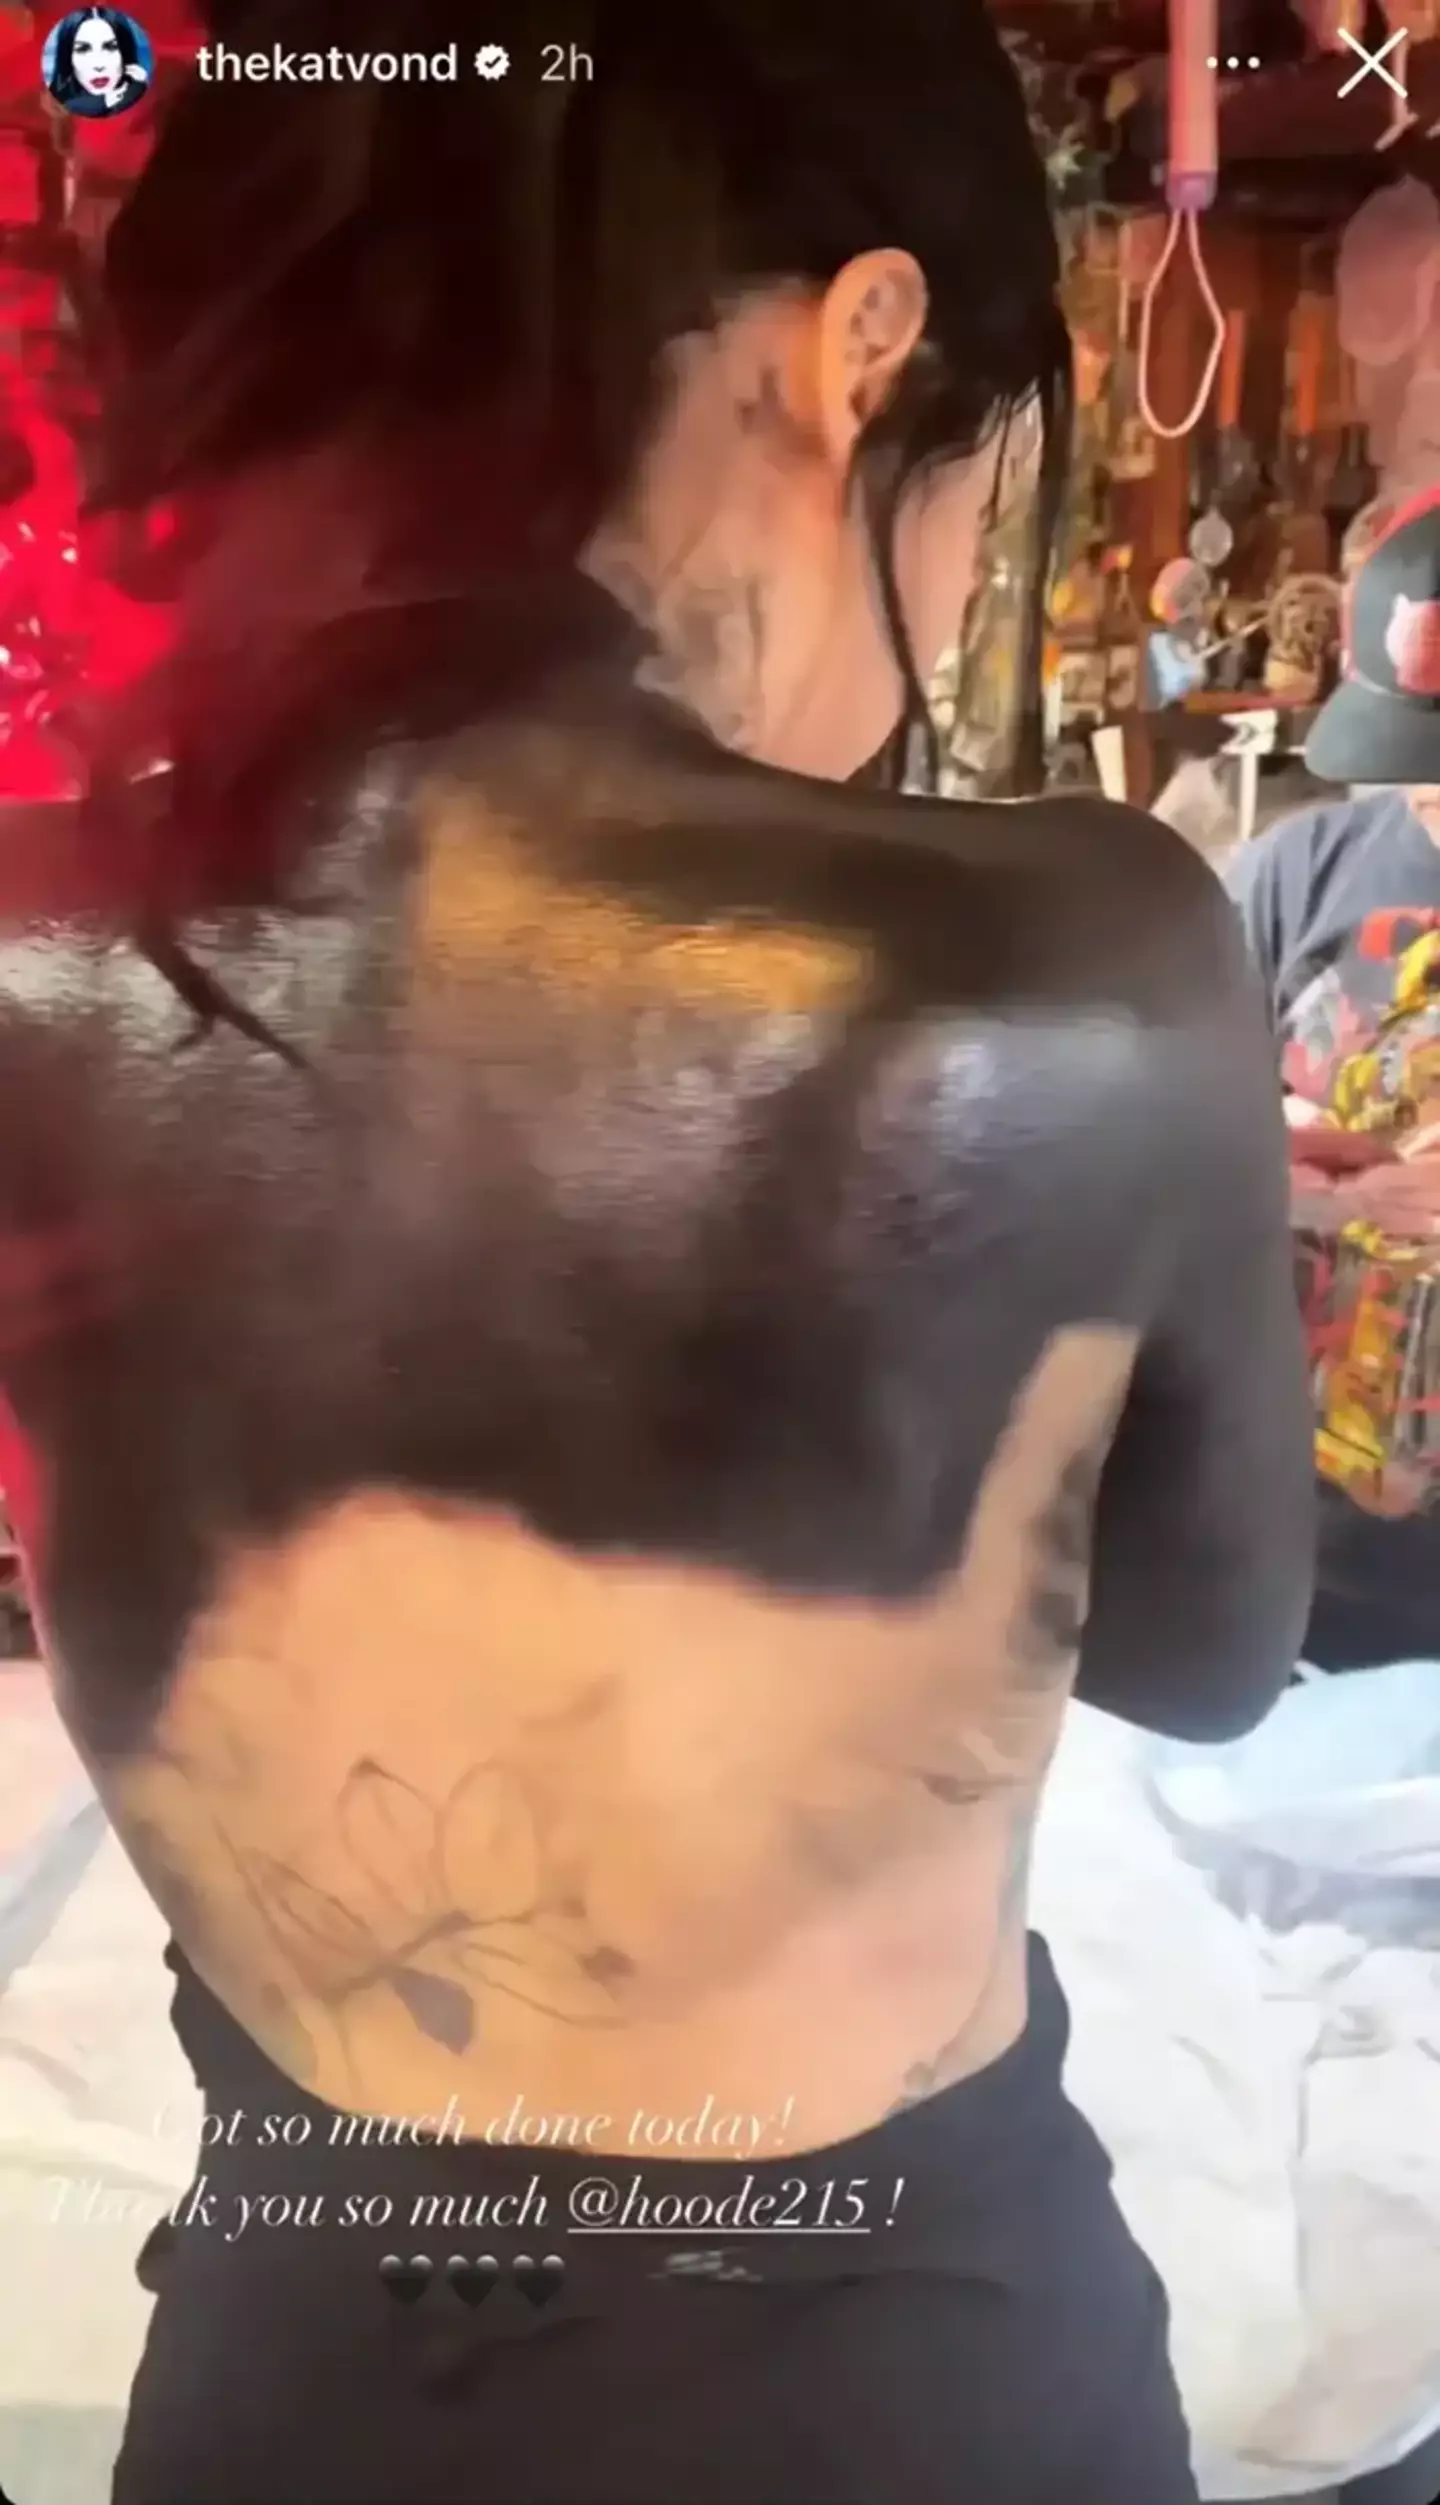 Kat Von D's cover-up extends across her neck and halfway down her back.